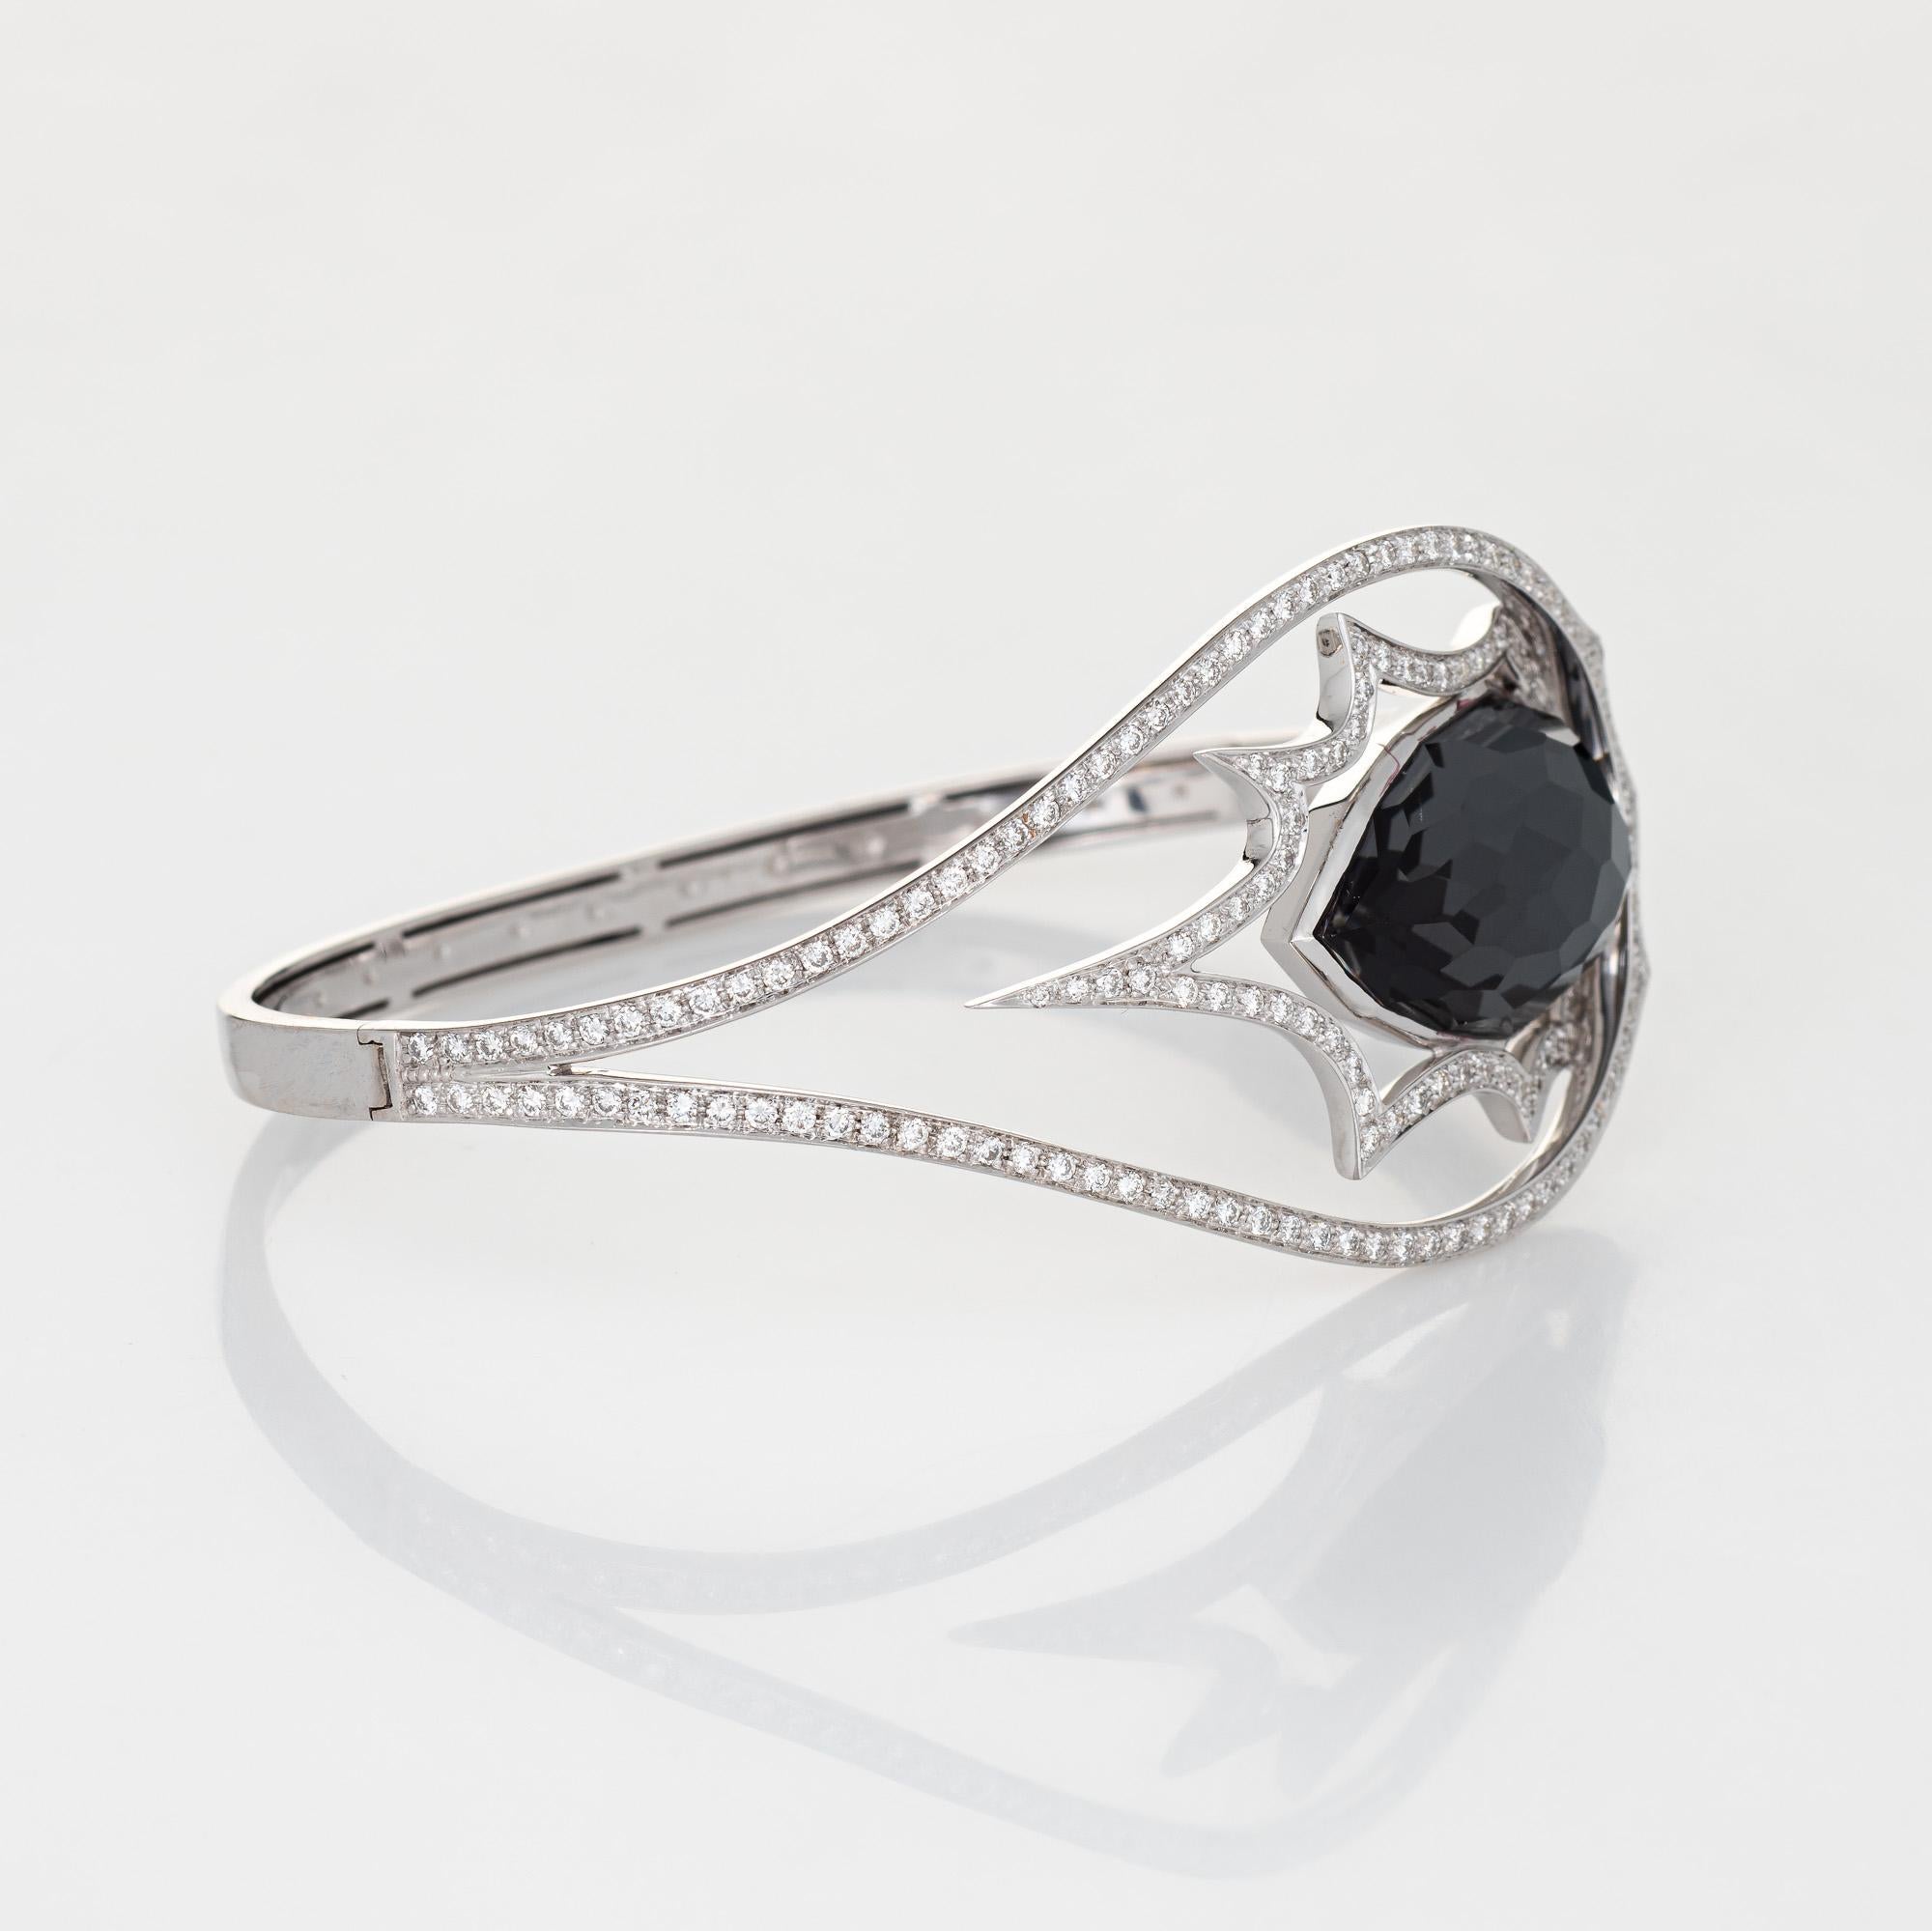 Stephen Webster cuff bracelet, crafted in 18 karat white gold.

Round brilliant cut diamonds total an estimated 1.75 carats (estimated at H-I color and VS2 clarity). Checkerboard faceted hematite measures 22mm x 13mm (in excellent condition and free